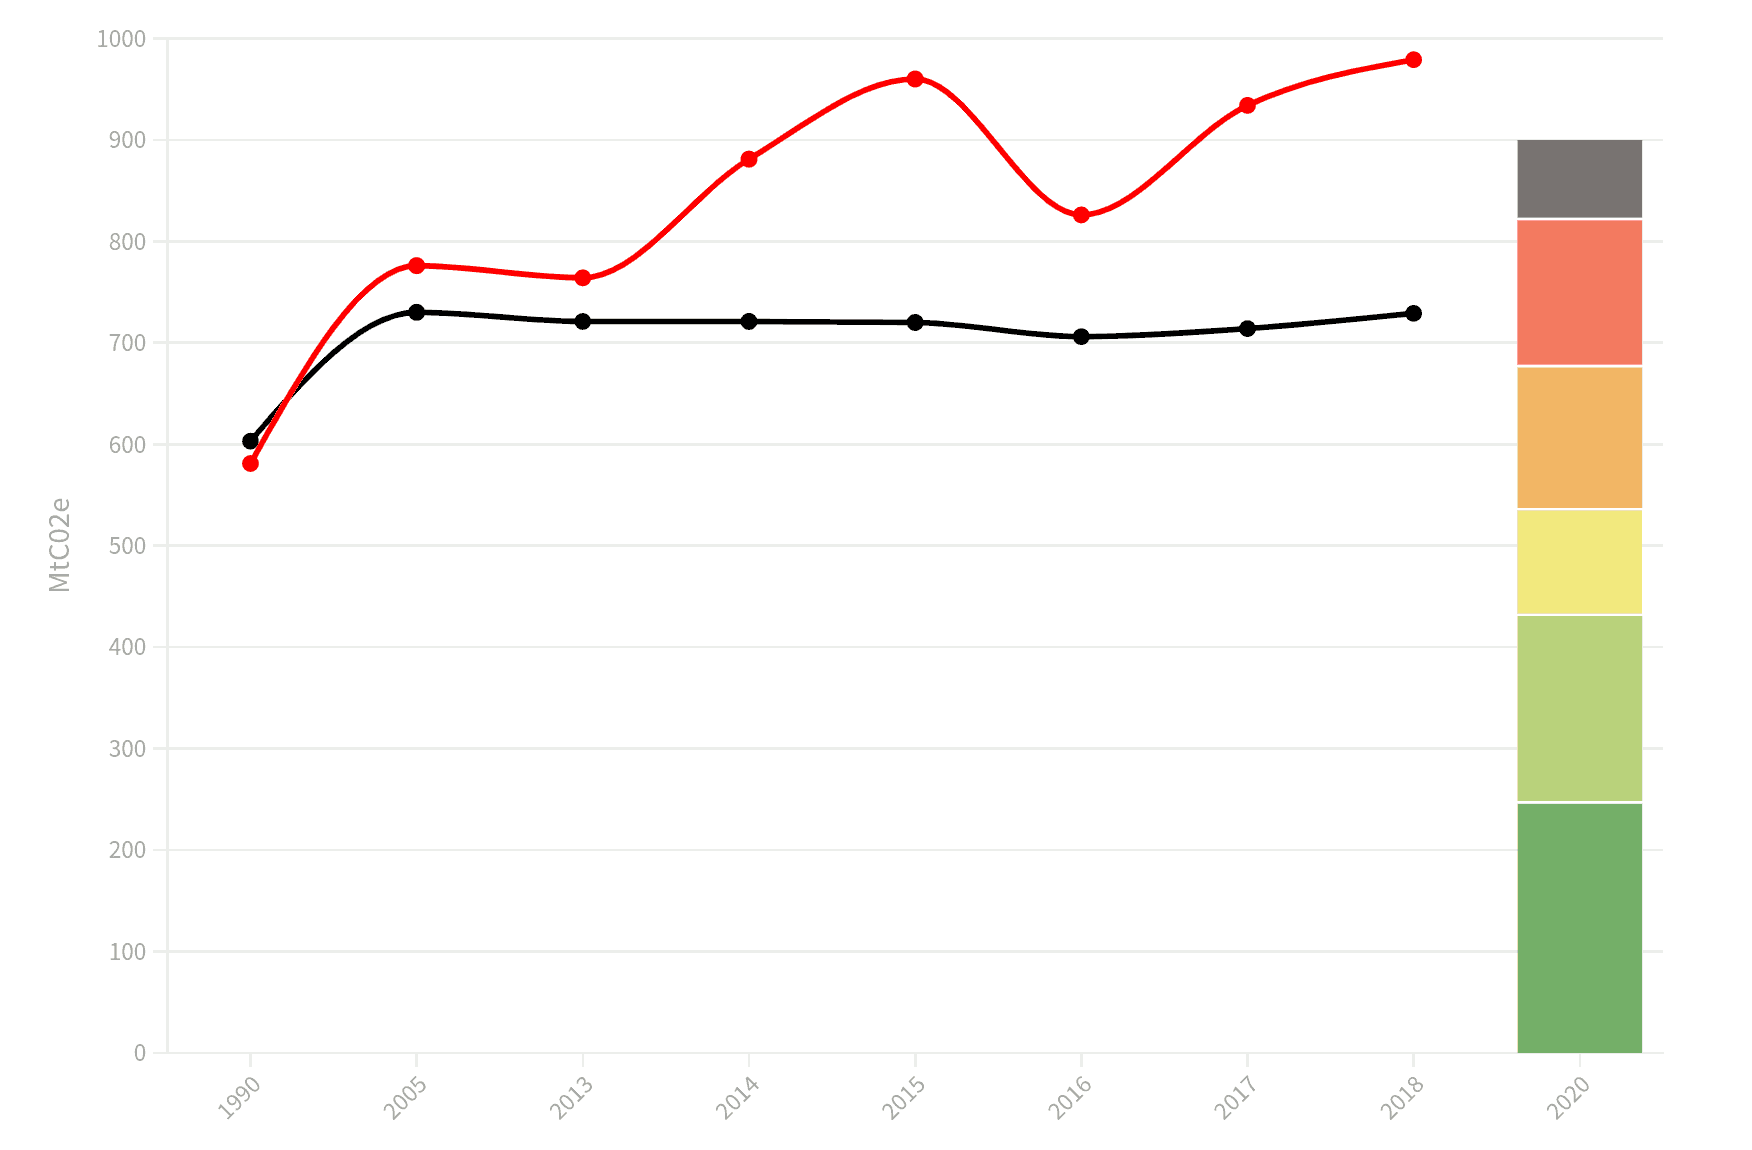 Linear graph of Canada’s emission with a red and black line and a stack bar on the right